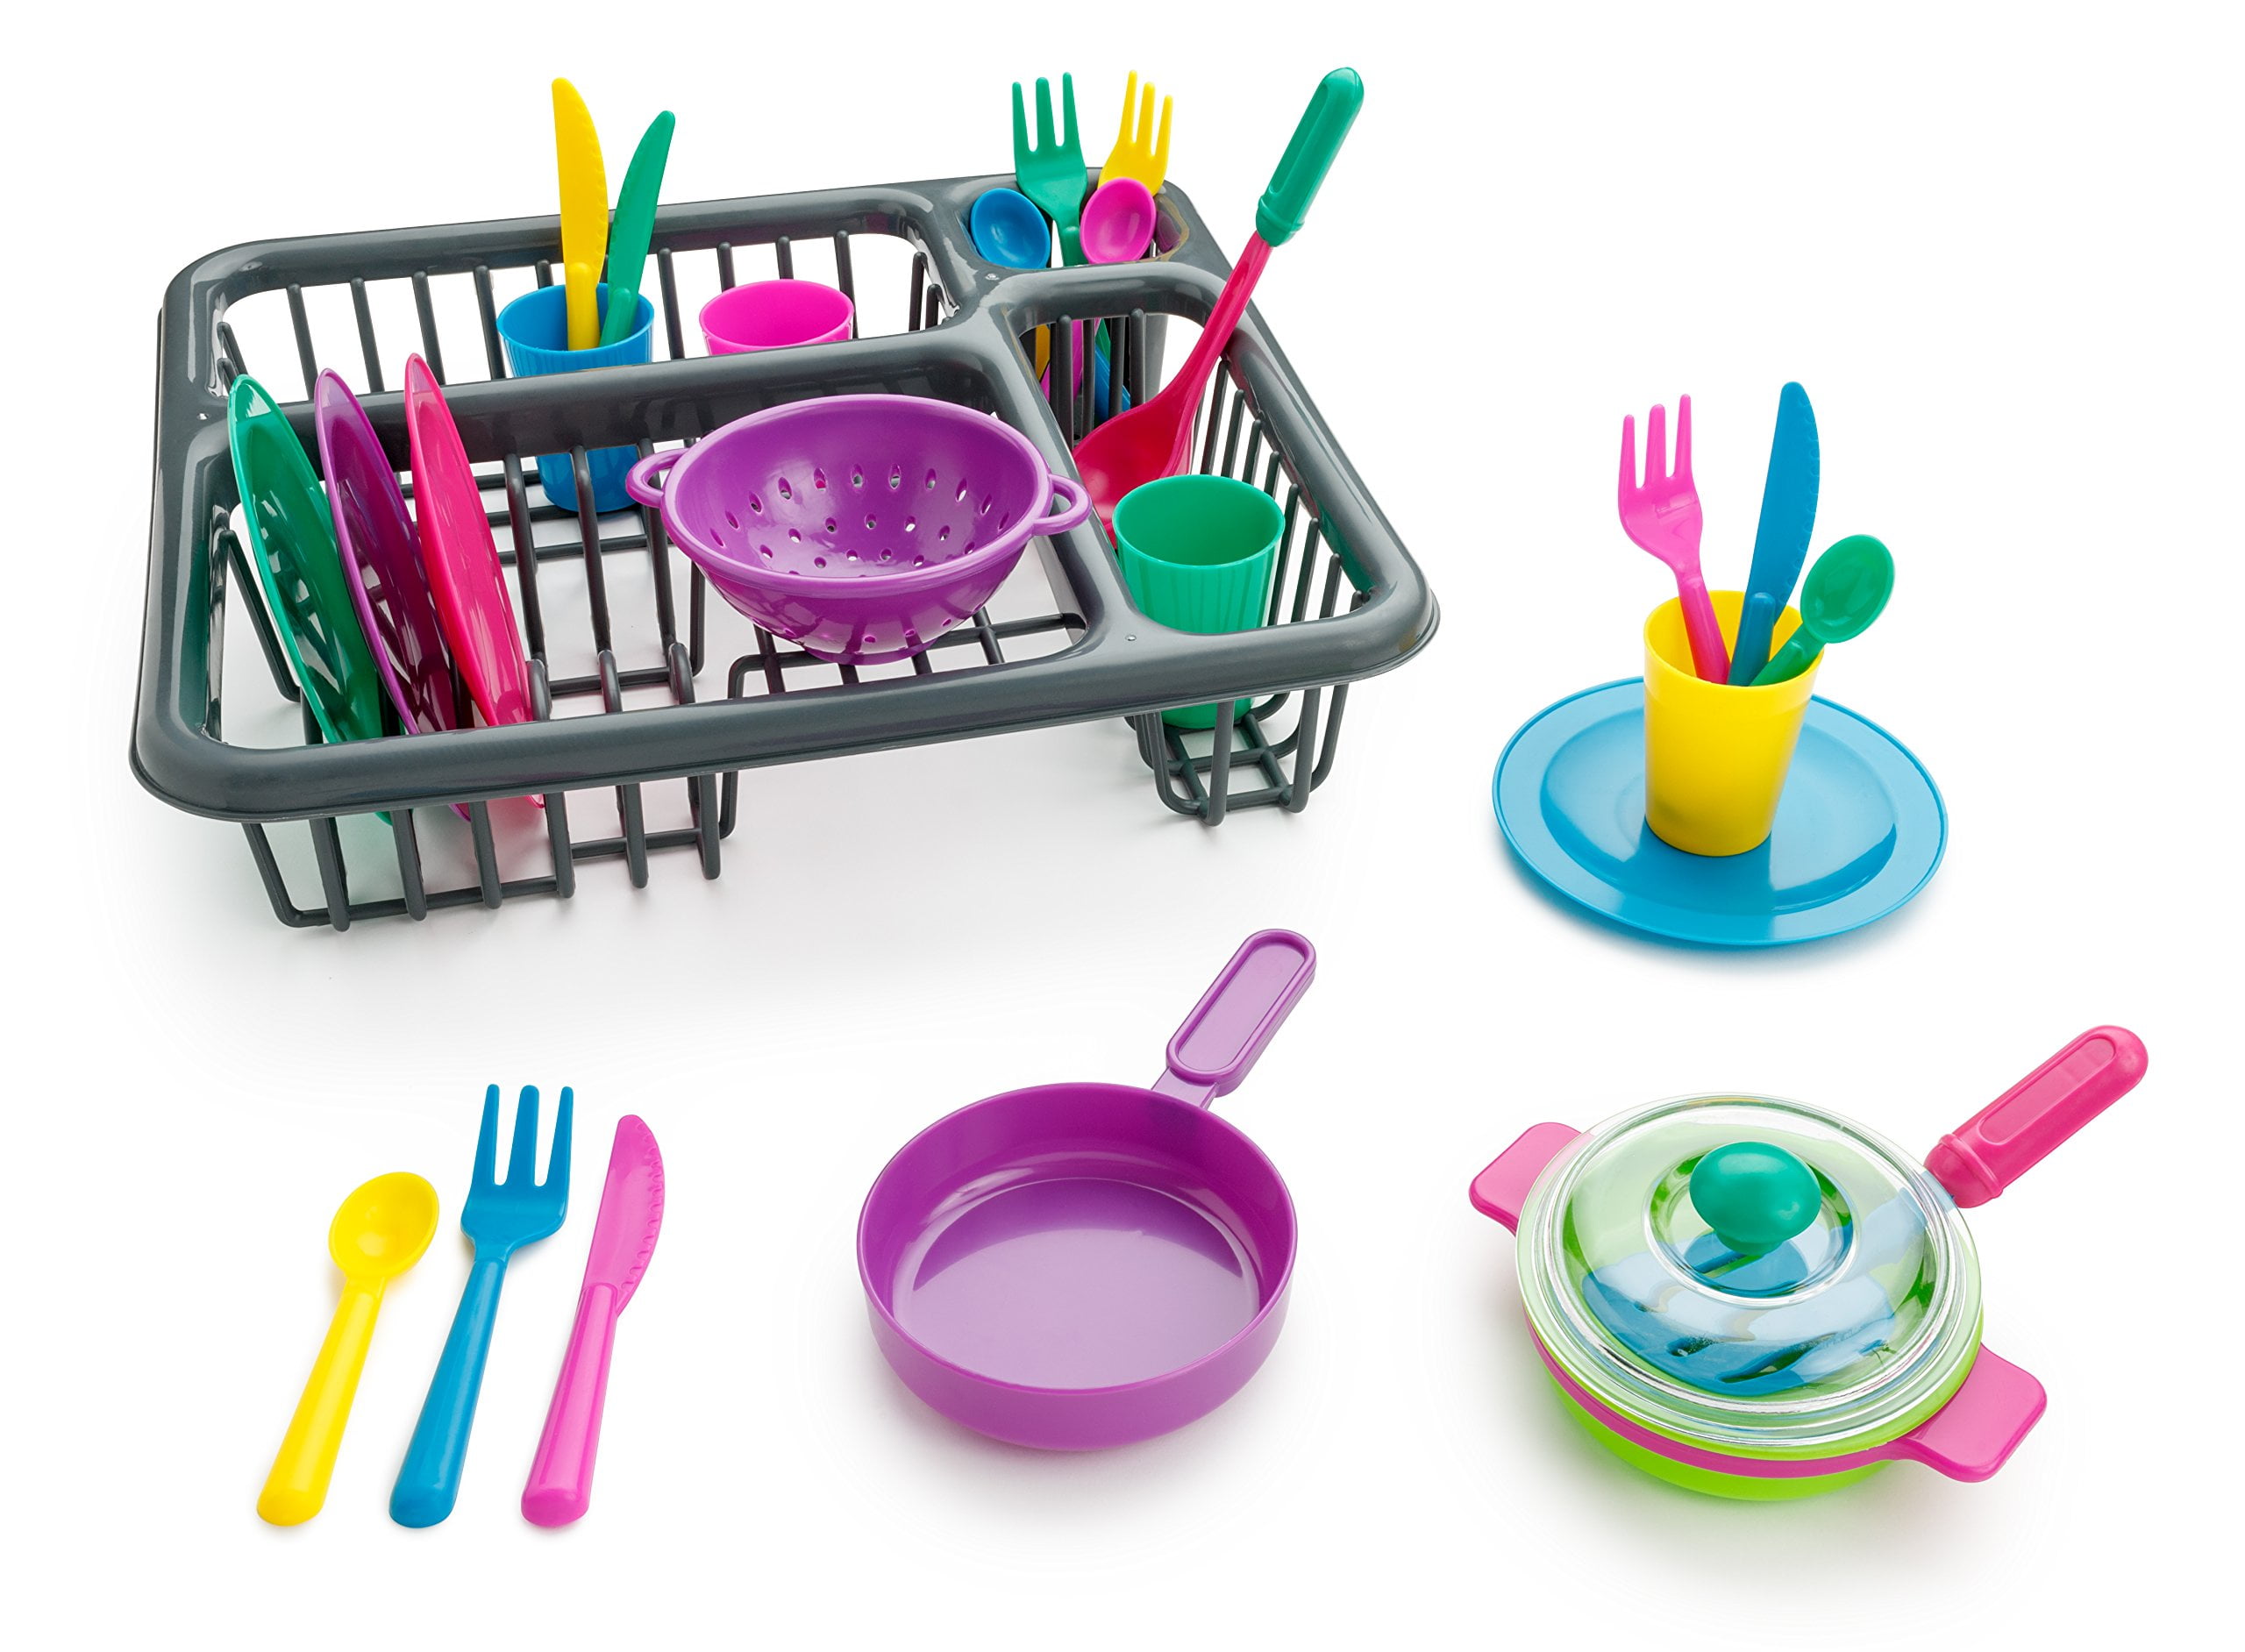 Childrens Durable Kitchen Toys Tableware Dishes Play set 27 Pcs 